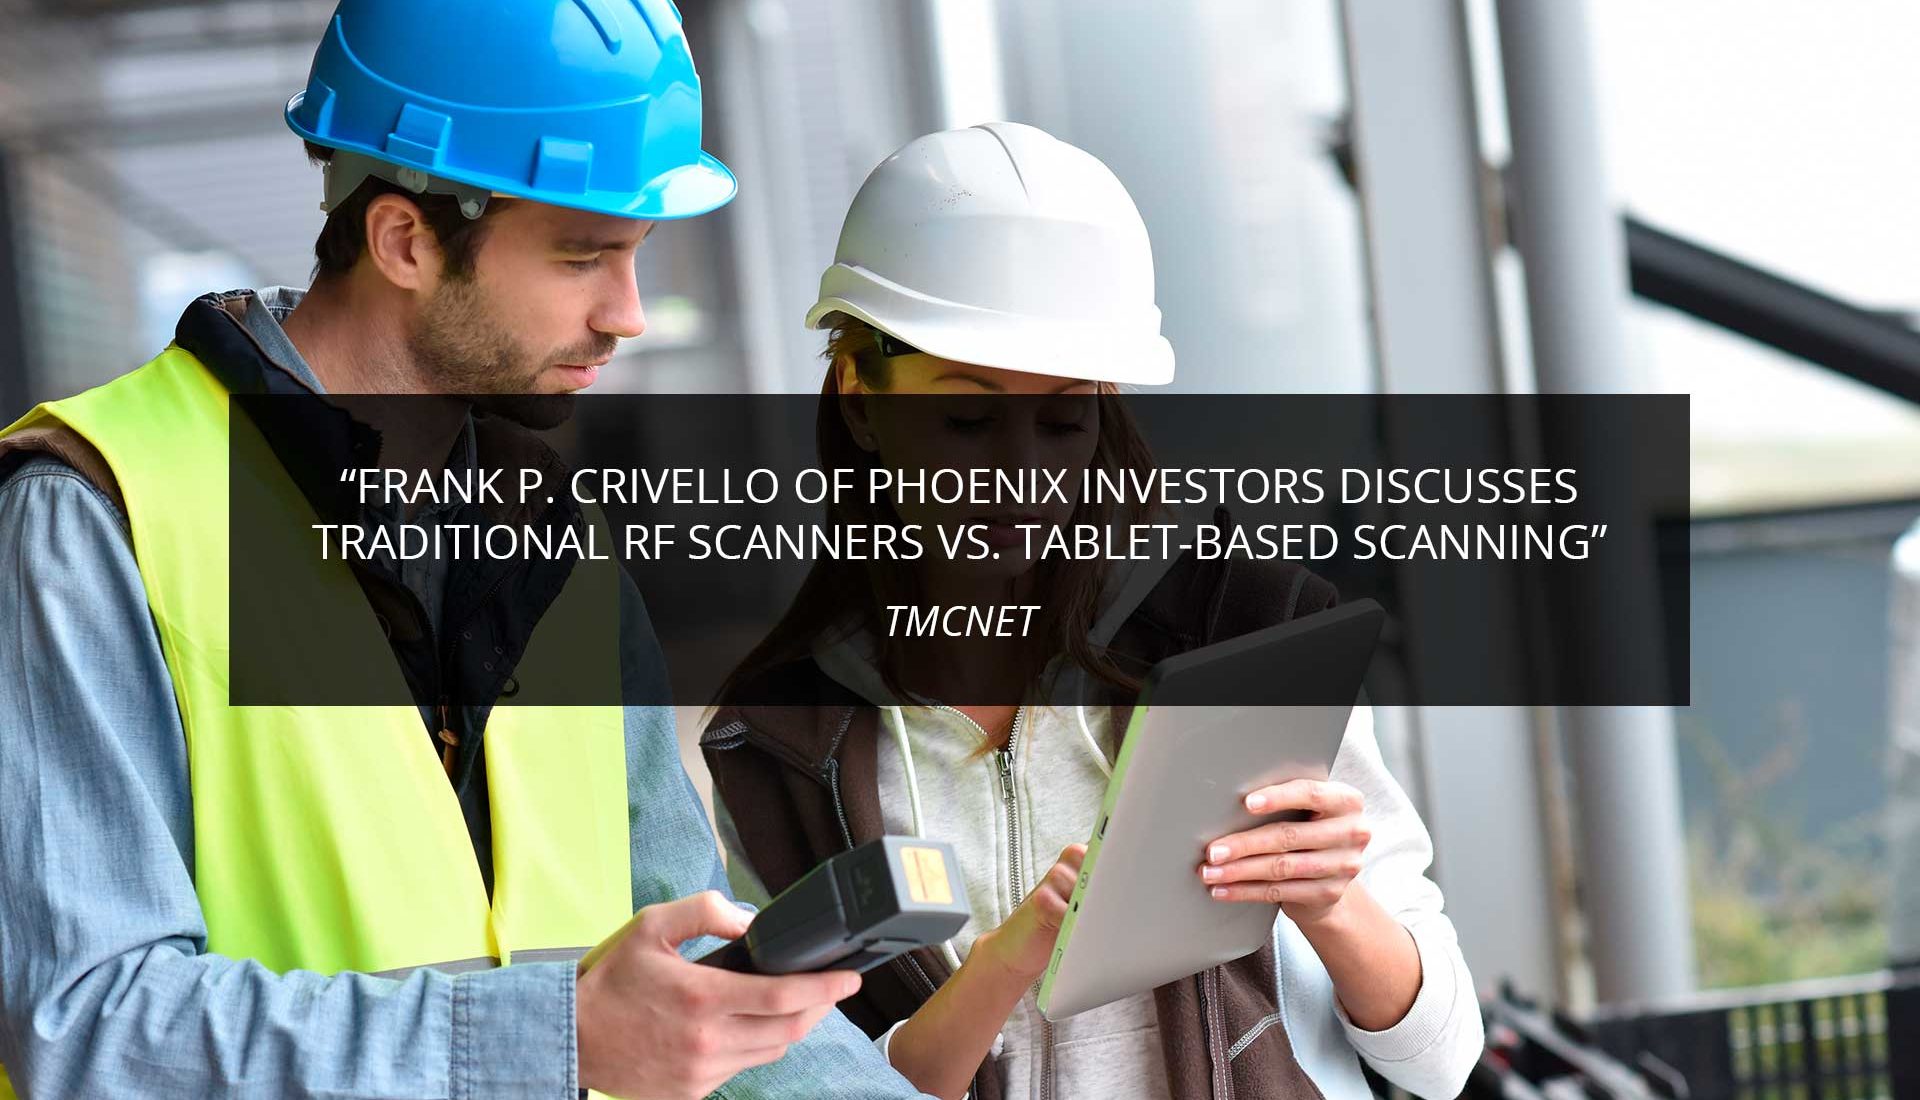 Frank P. Crivello of Phoenix Investors Discusses Traditional RF Scanners vs. Tablet-Based Scanning